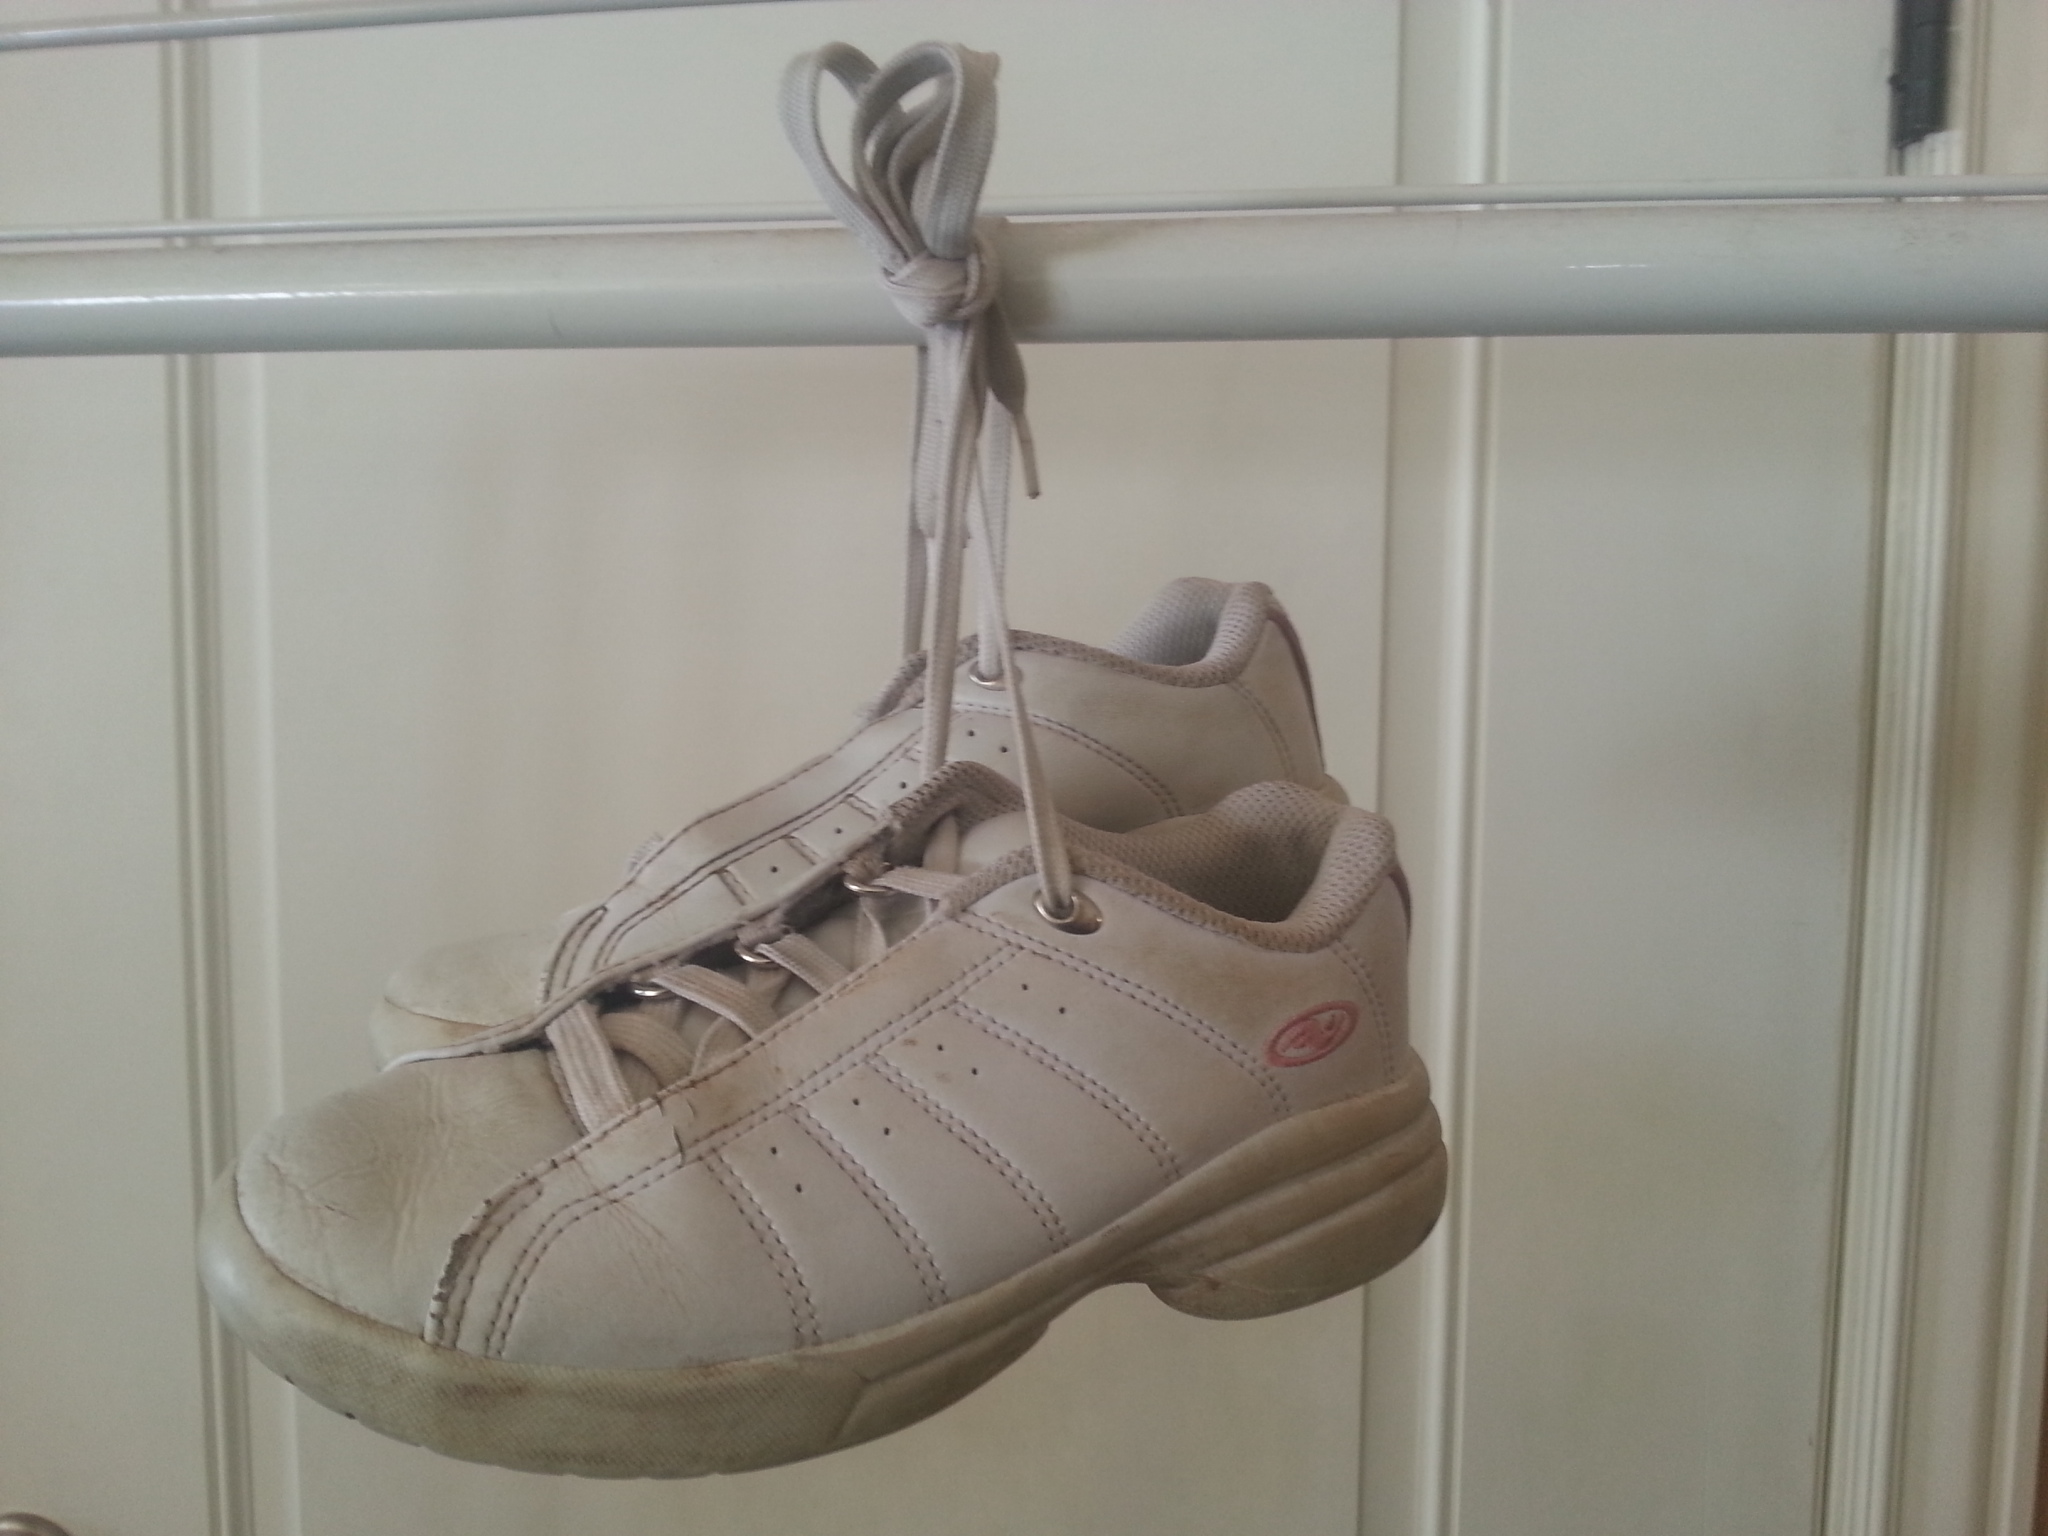 Girls white leather tennis shoes size 13